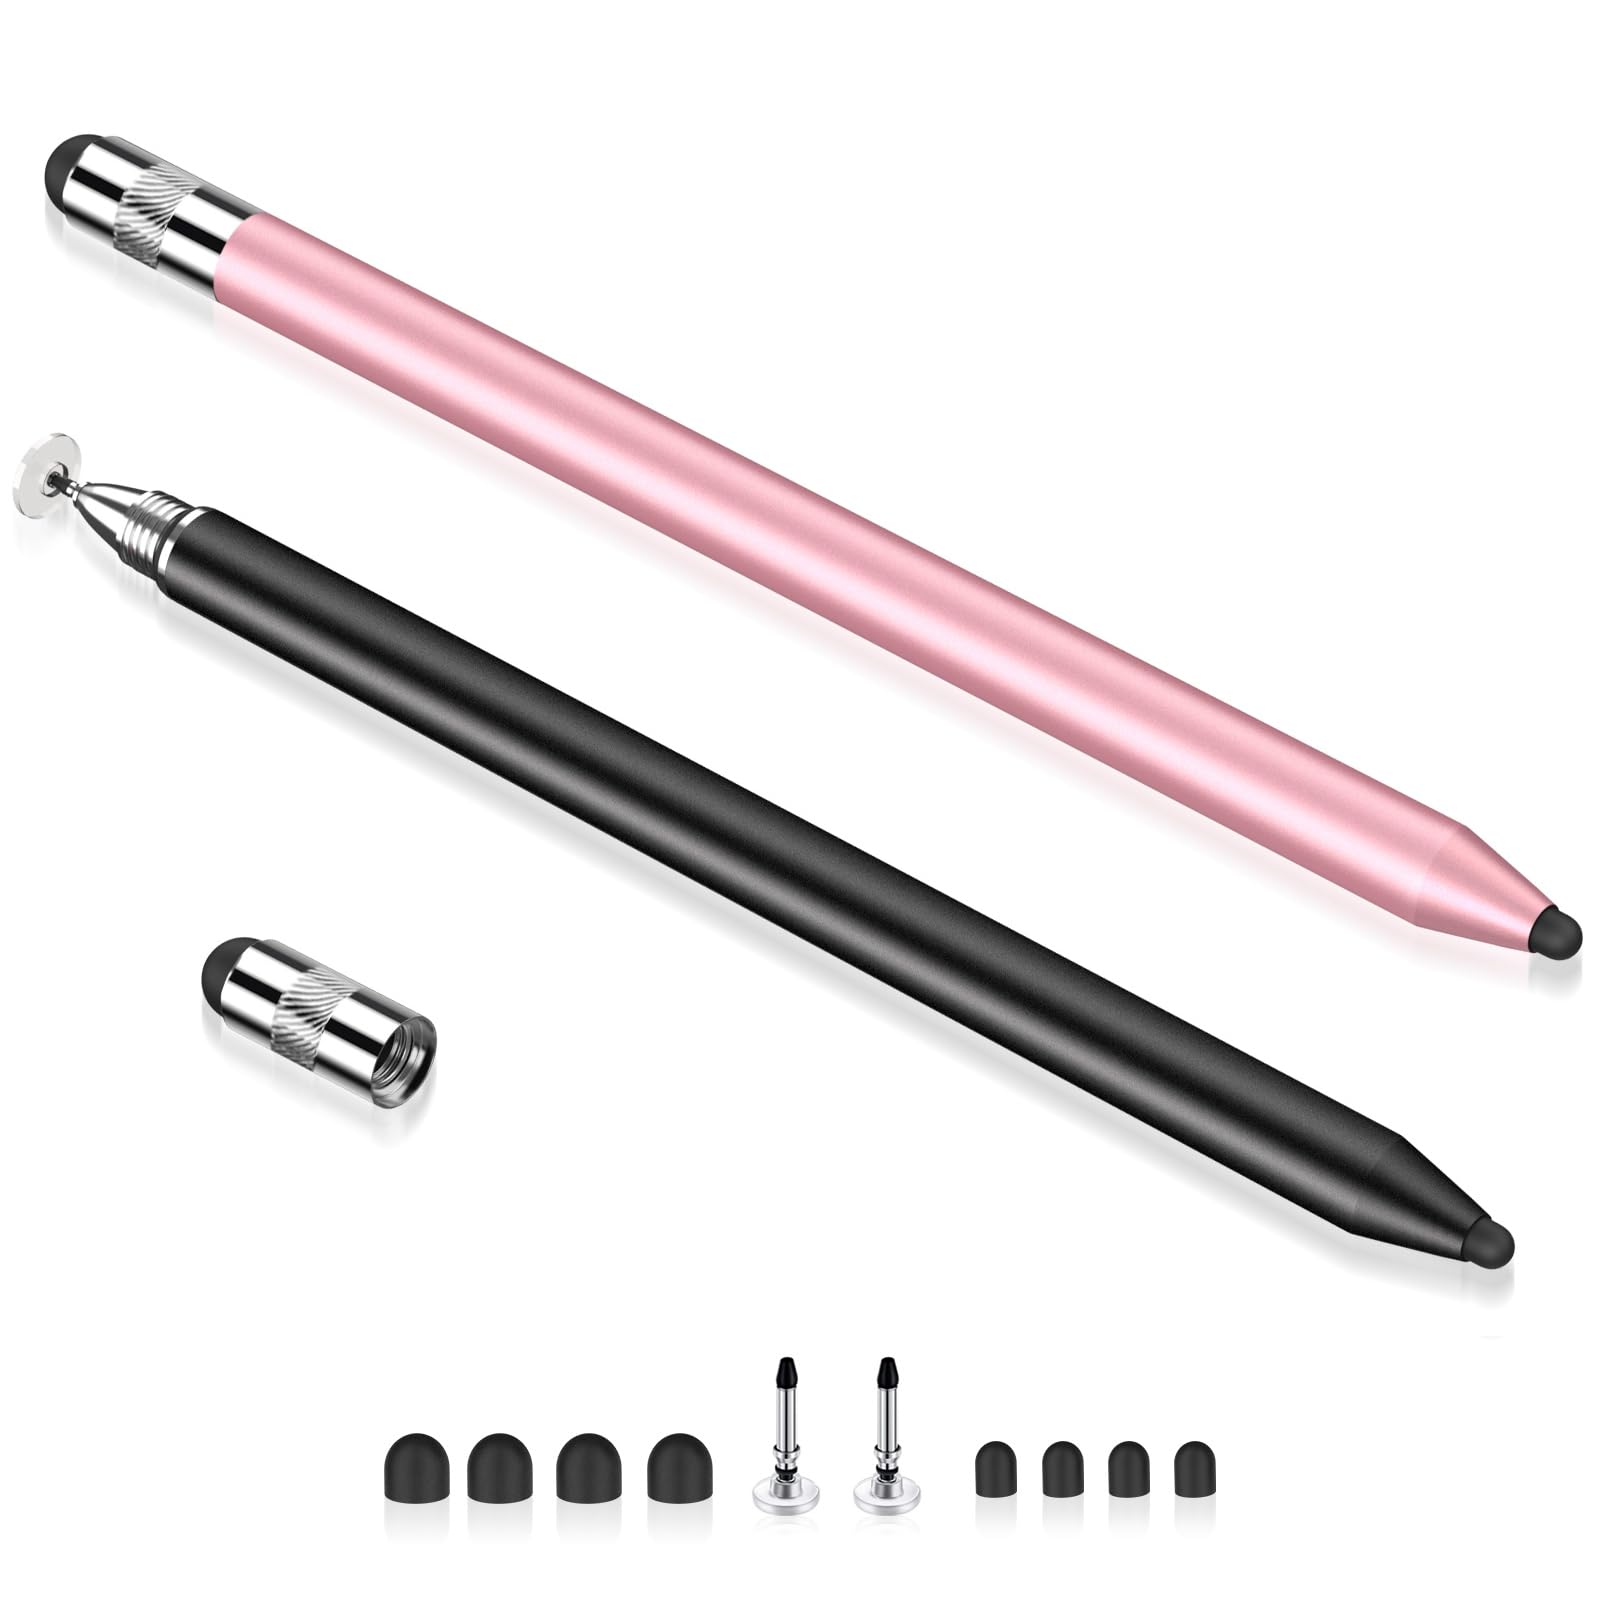 Buy MEKO 3 in 1 Stylus Pens for Touch Screens, High Sensitivity & Precision  Capacitive Stylus Pencil for Apple iPad iPhone Tablets Samsung Galaxy All  Universal Touchscreen Devices (2 Pack-Black/Rose Gold)